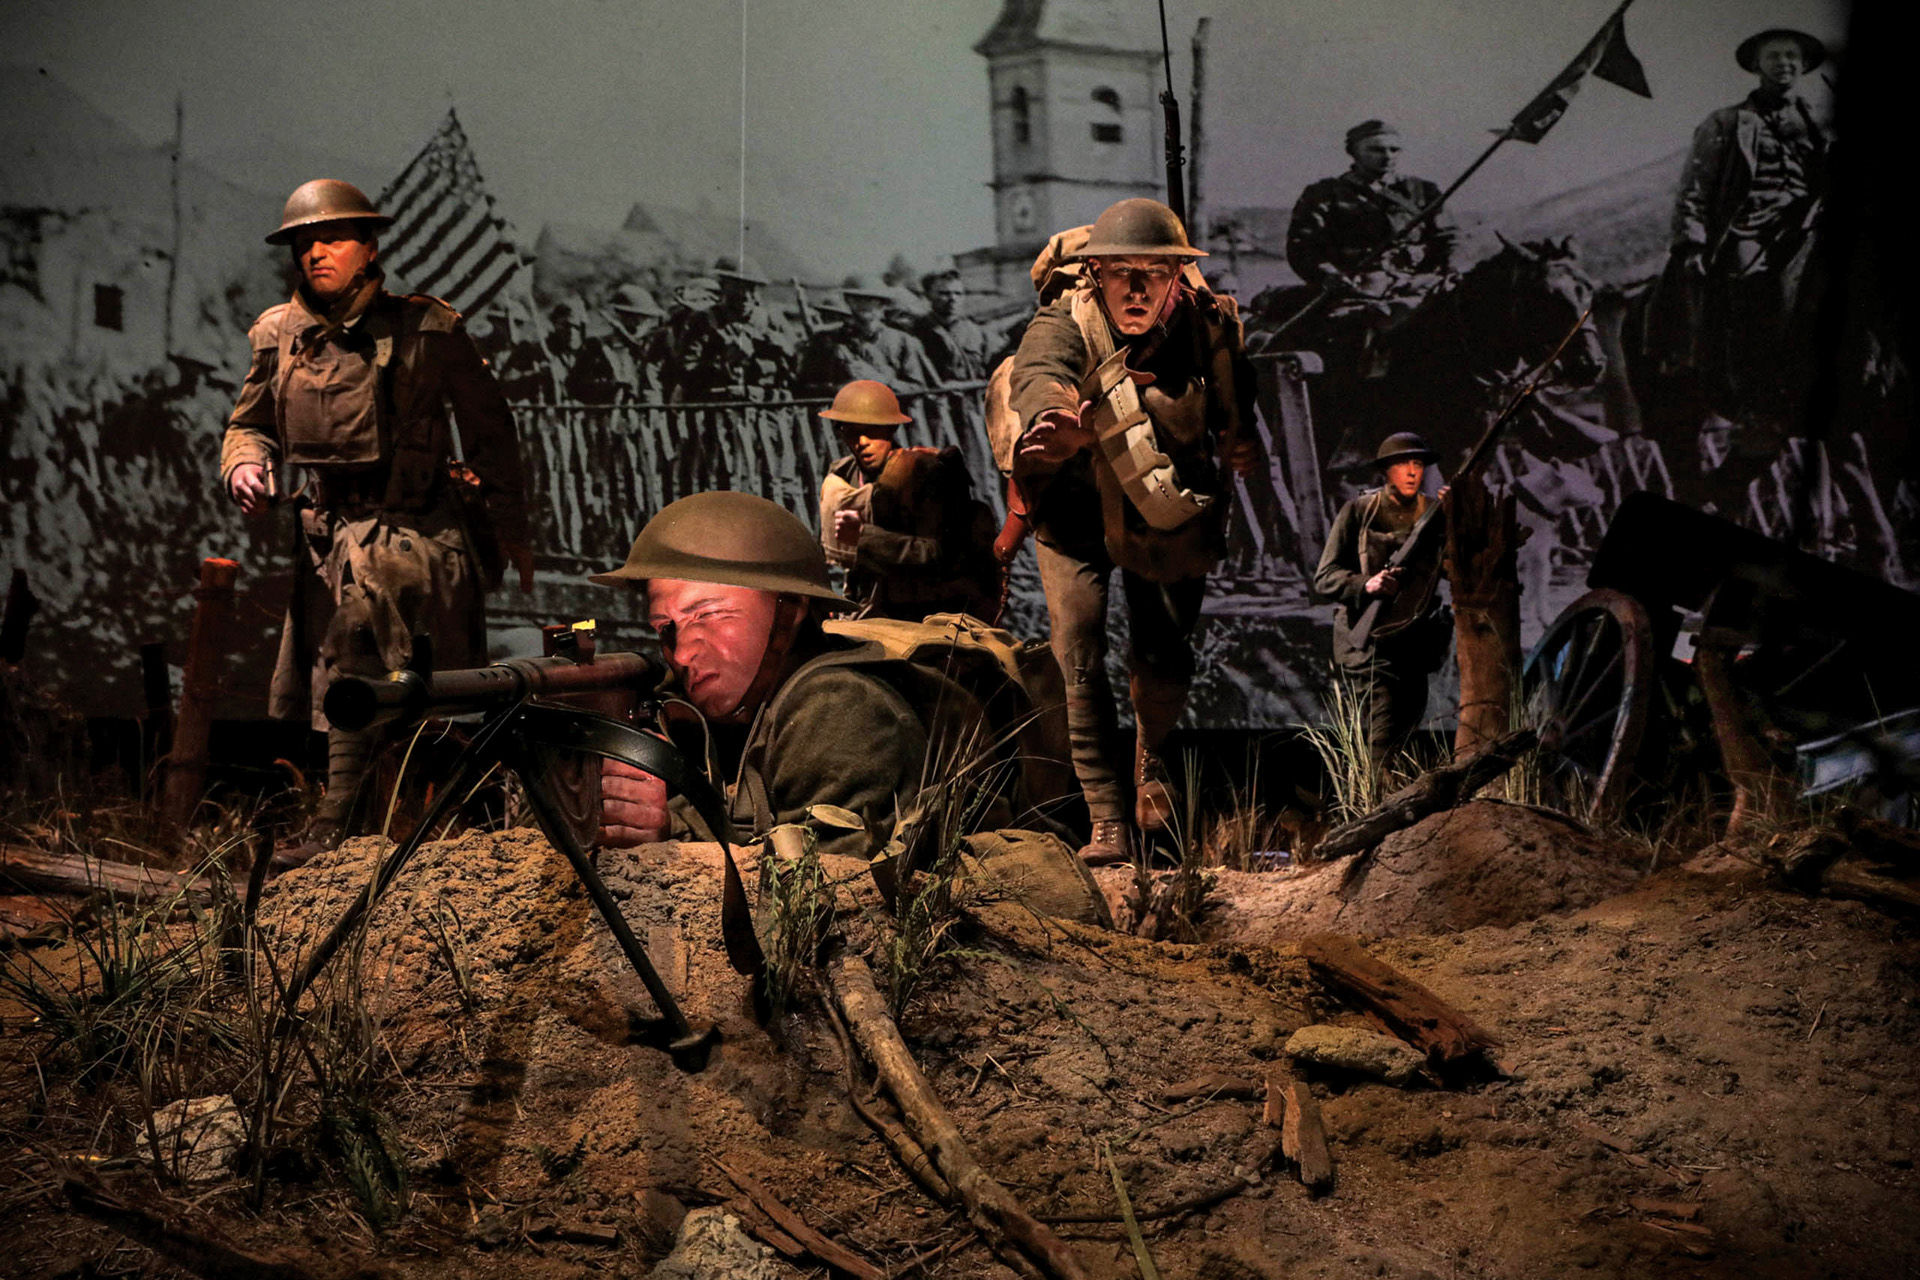 As museum visitors emerge from the trench-like entrance of the Nation Overseas Gallery, cast figures, lighting effects, imagery, and sounds of distant battle recreate a setting based on a famous photograph of the Meuse-Argonne Offensive.